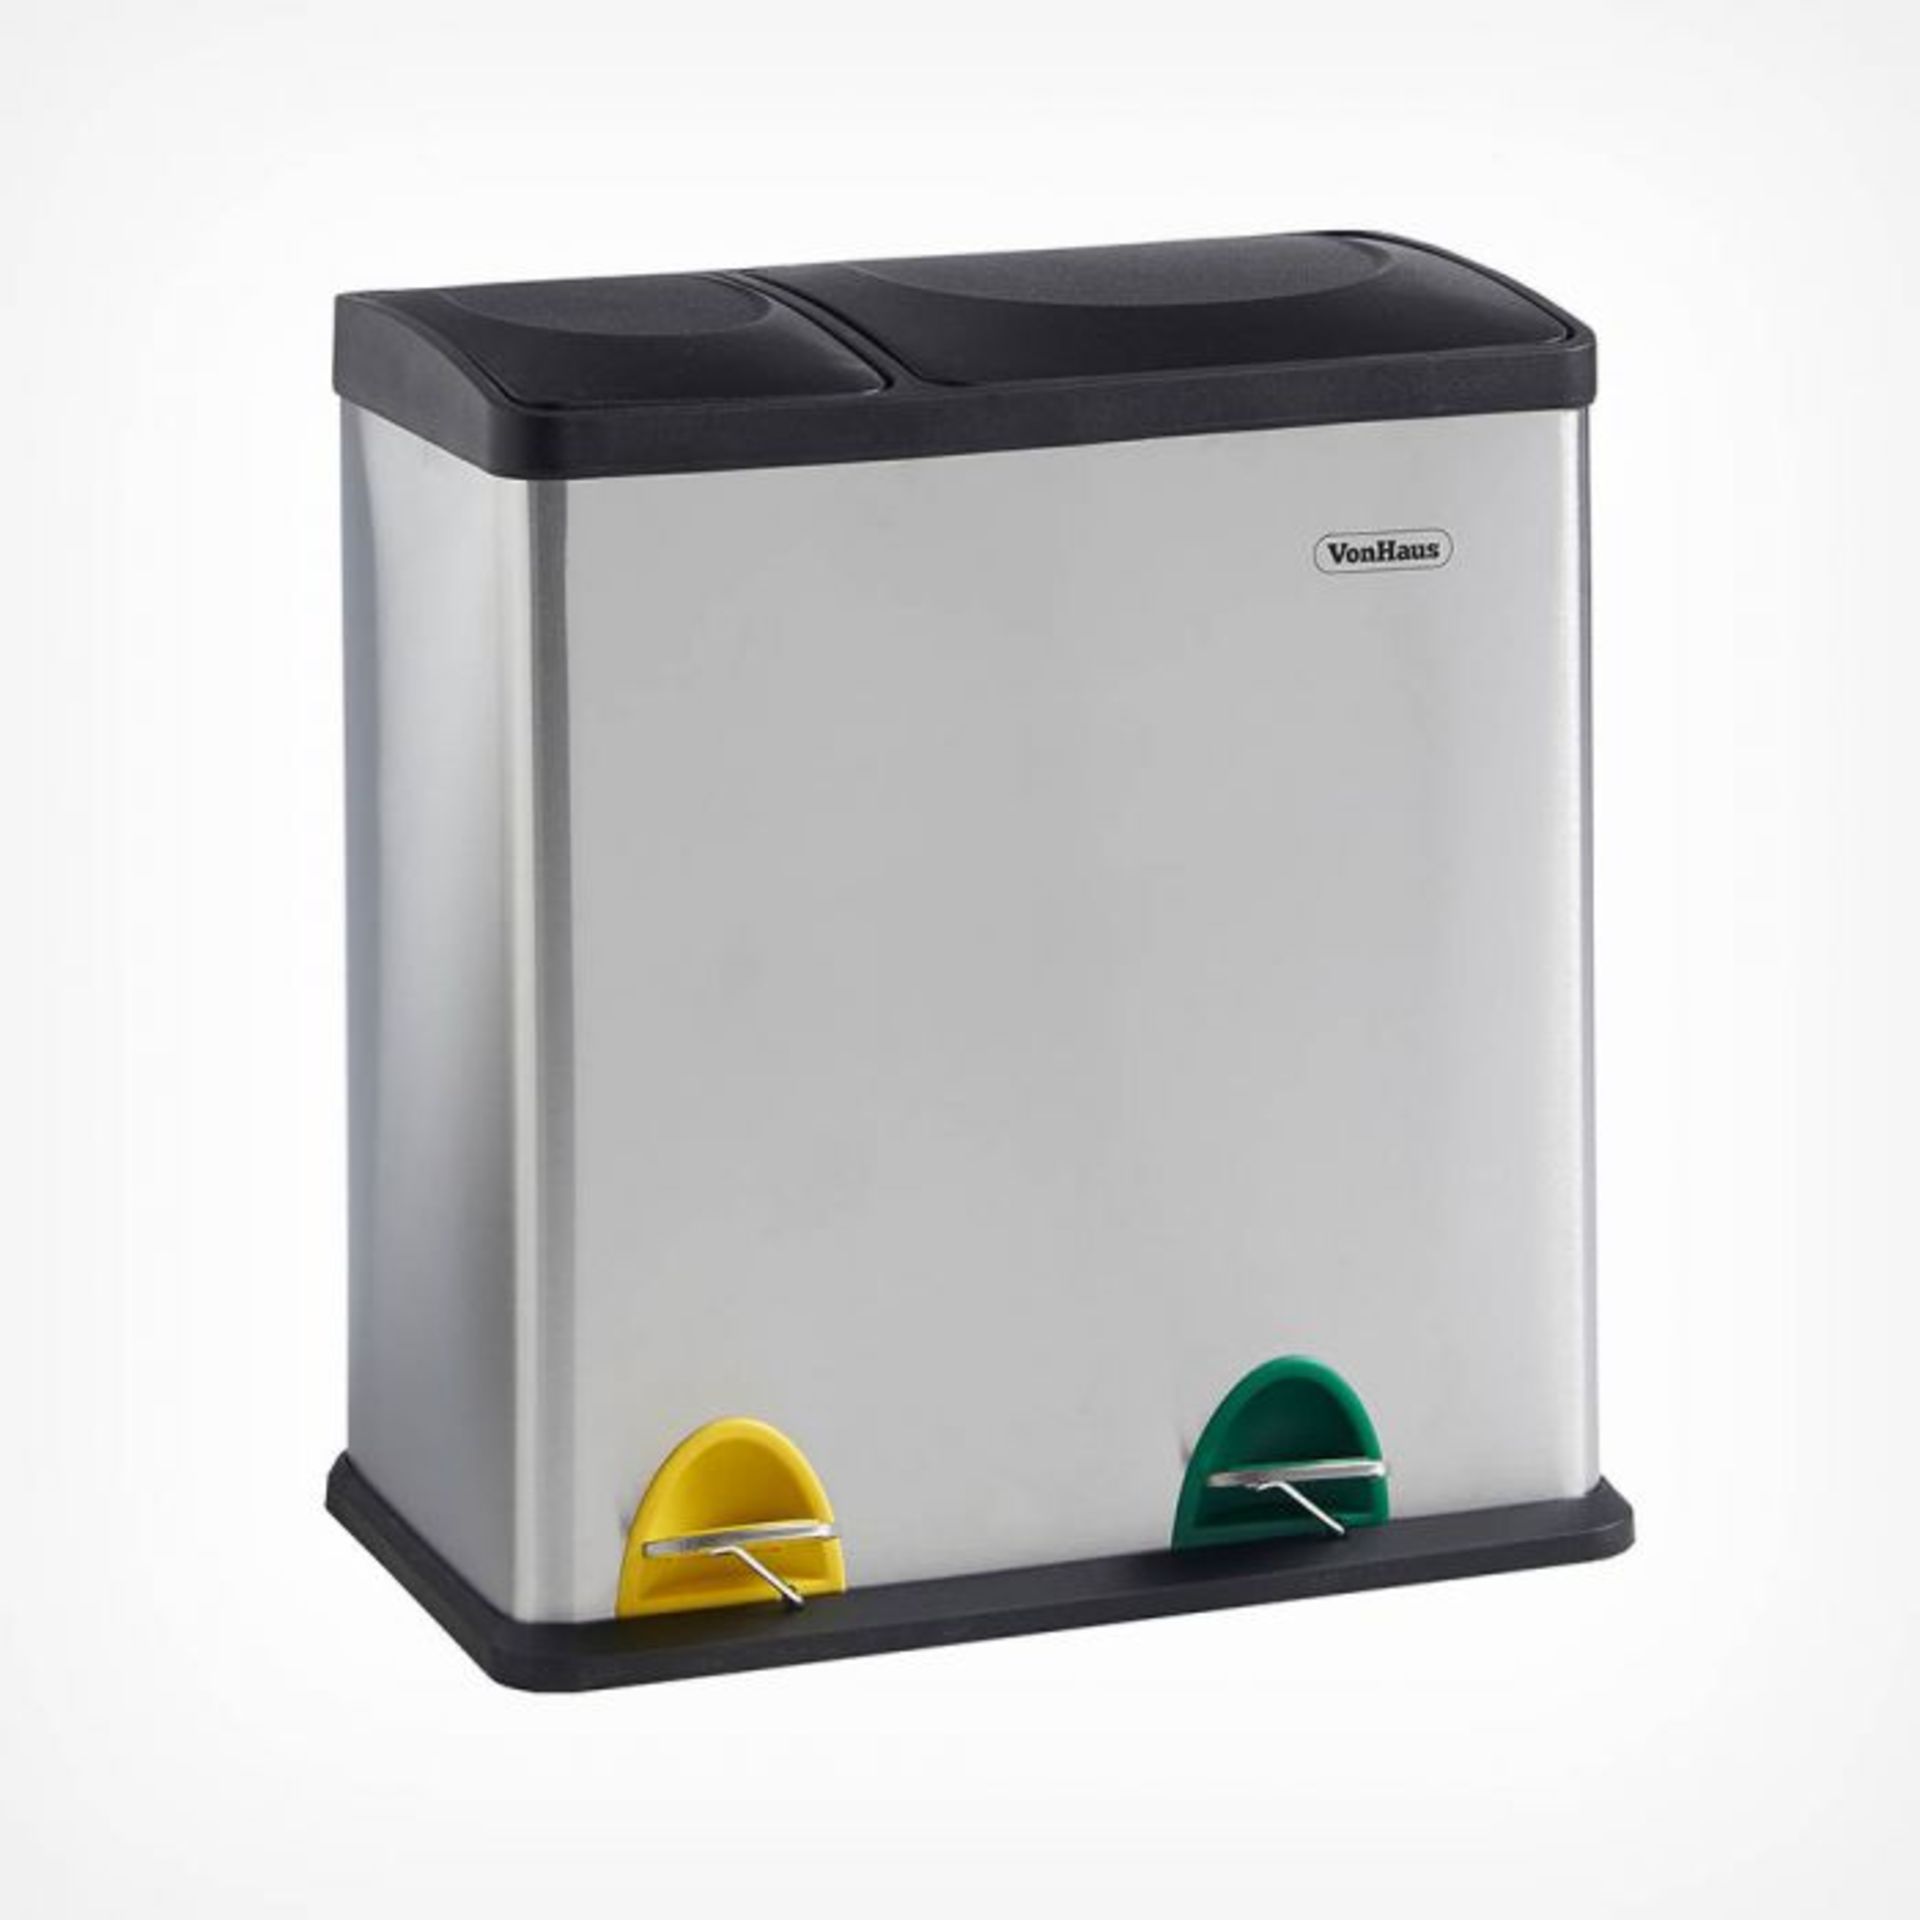 (V101) 6L 2 in 1 Recycling Bin Streamline your recycling routine! Suitable for general househo... - Image 2 of 4